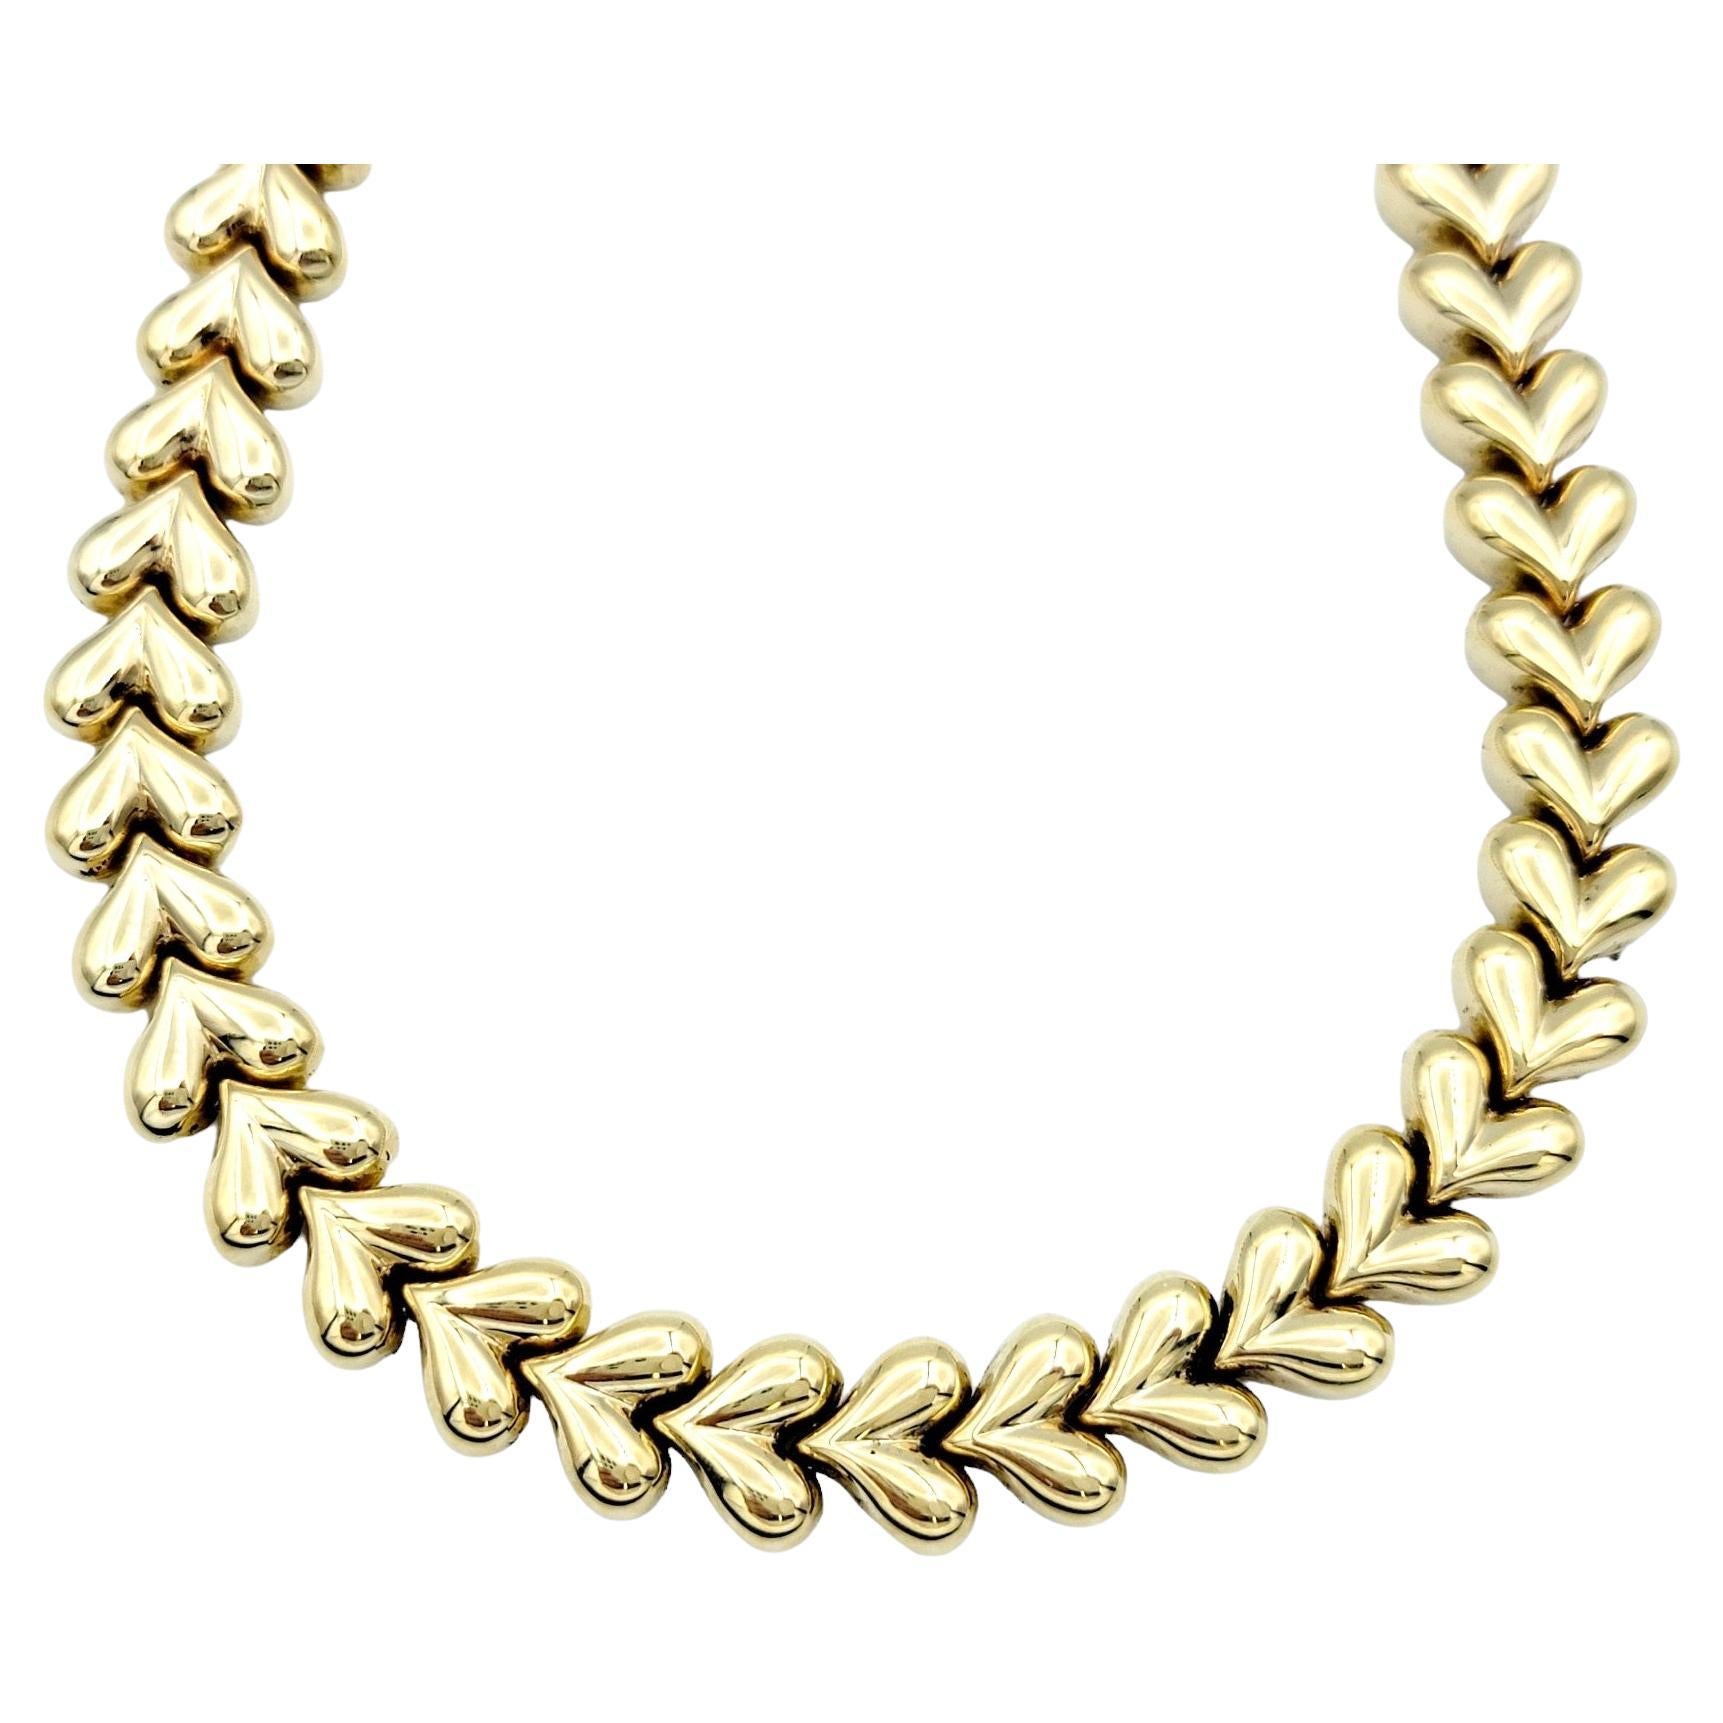 This charming and versatile 14 karat yellow gold link necklace is designed to capture hearts with its whimsical elegance. The necklace features unique heart-shaped links, each meticulously crafted with a high polish that radiates a brilliant shine.